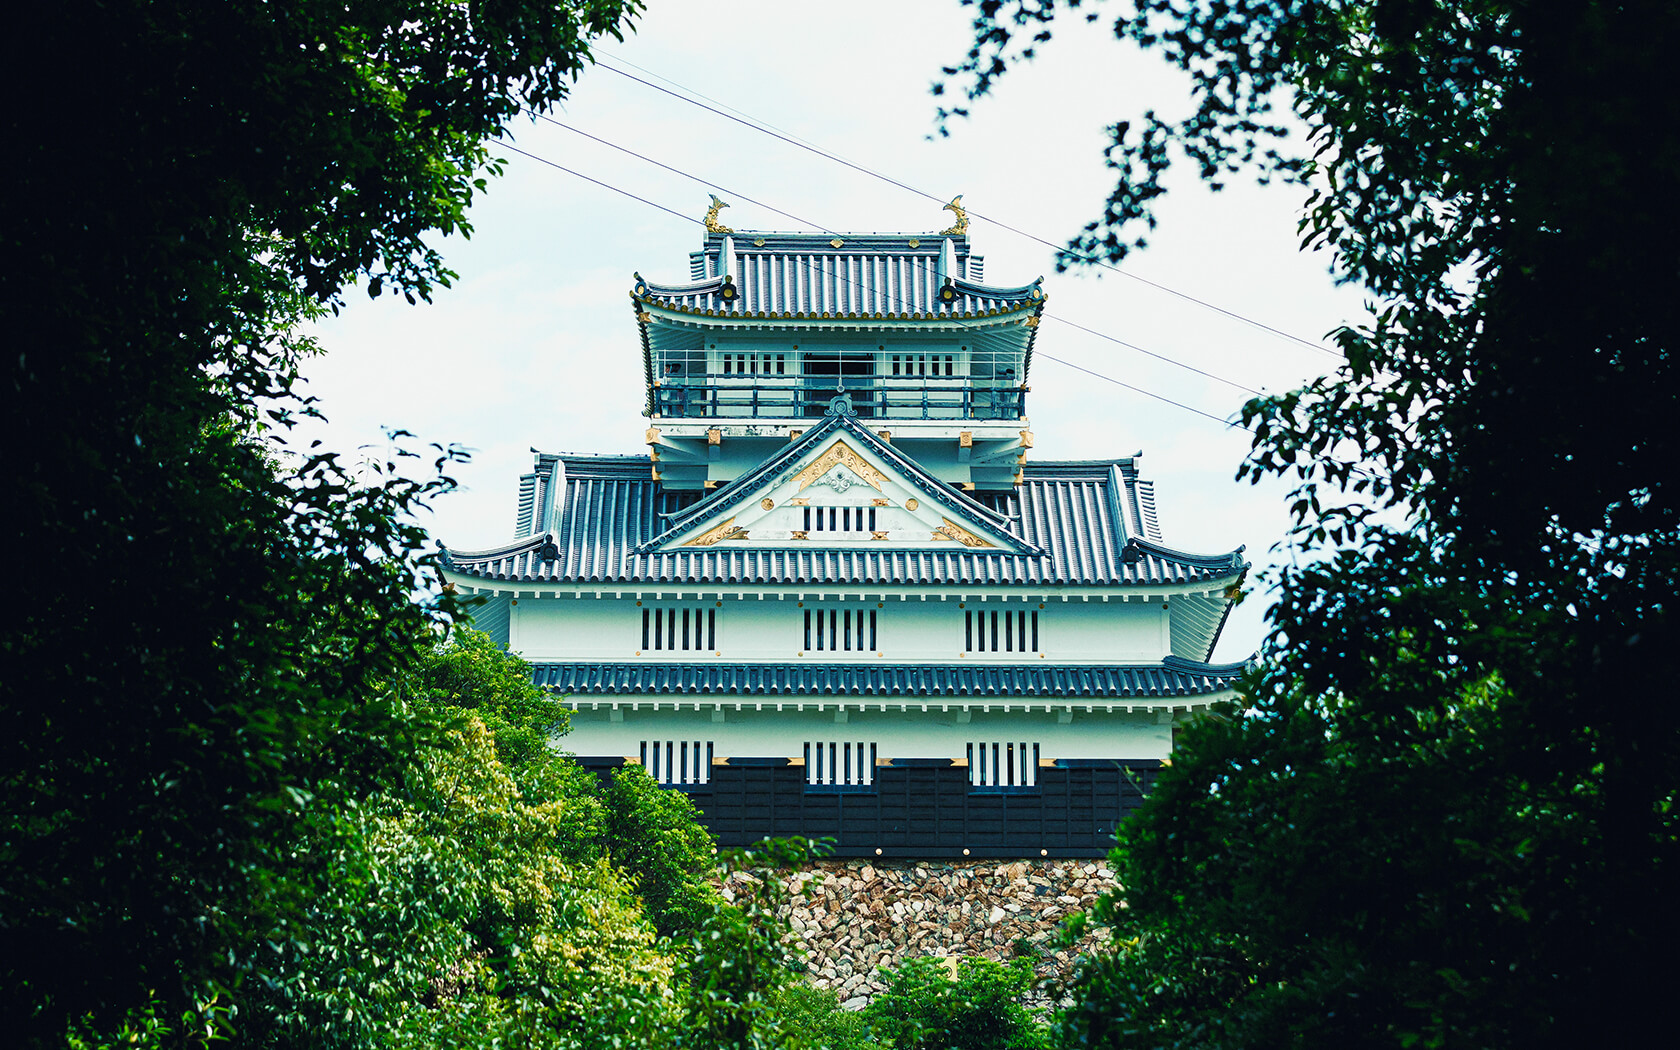 a traditional Japanese building and architecture seen from a gap between lots of trees